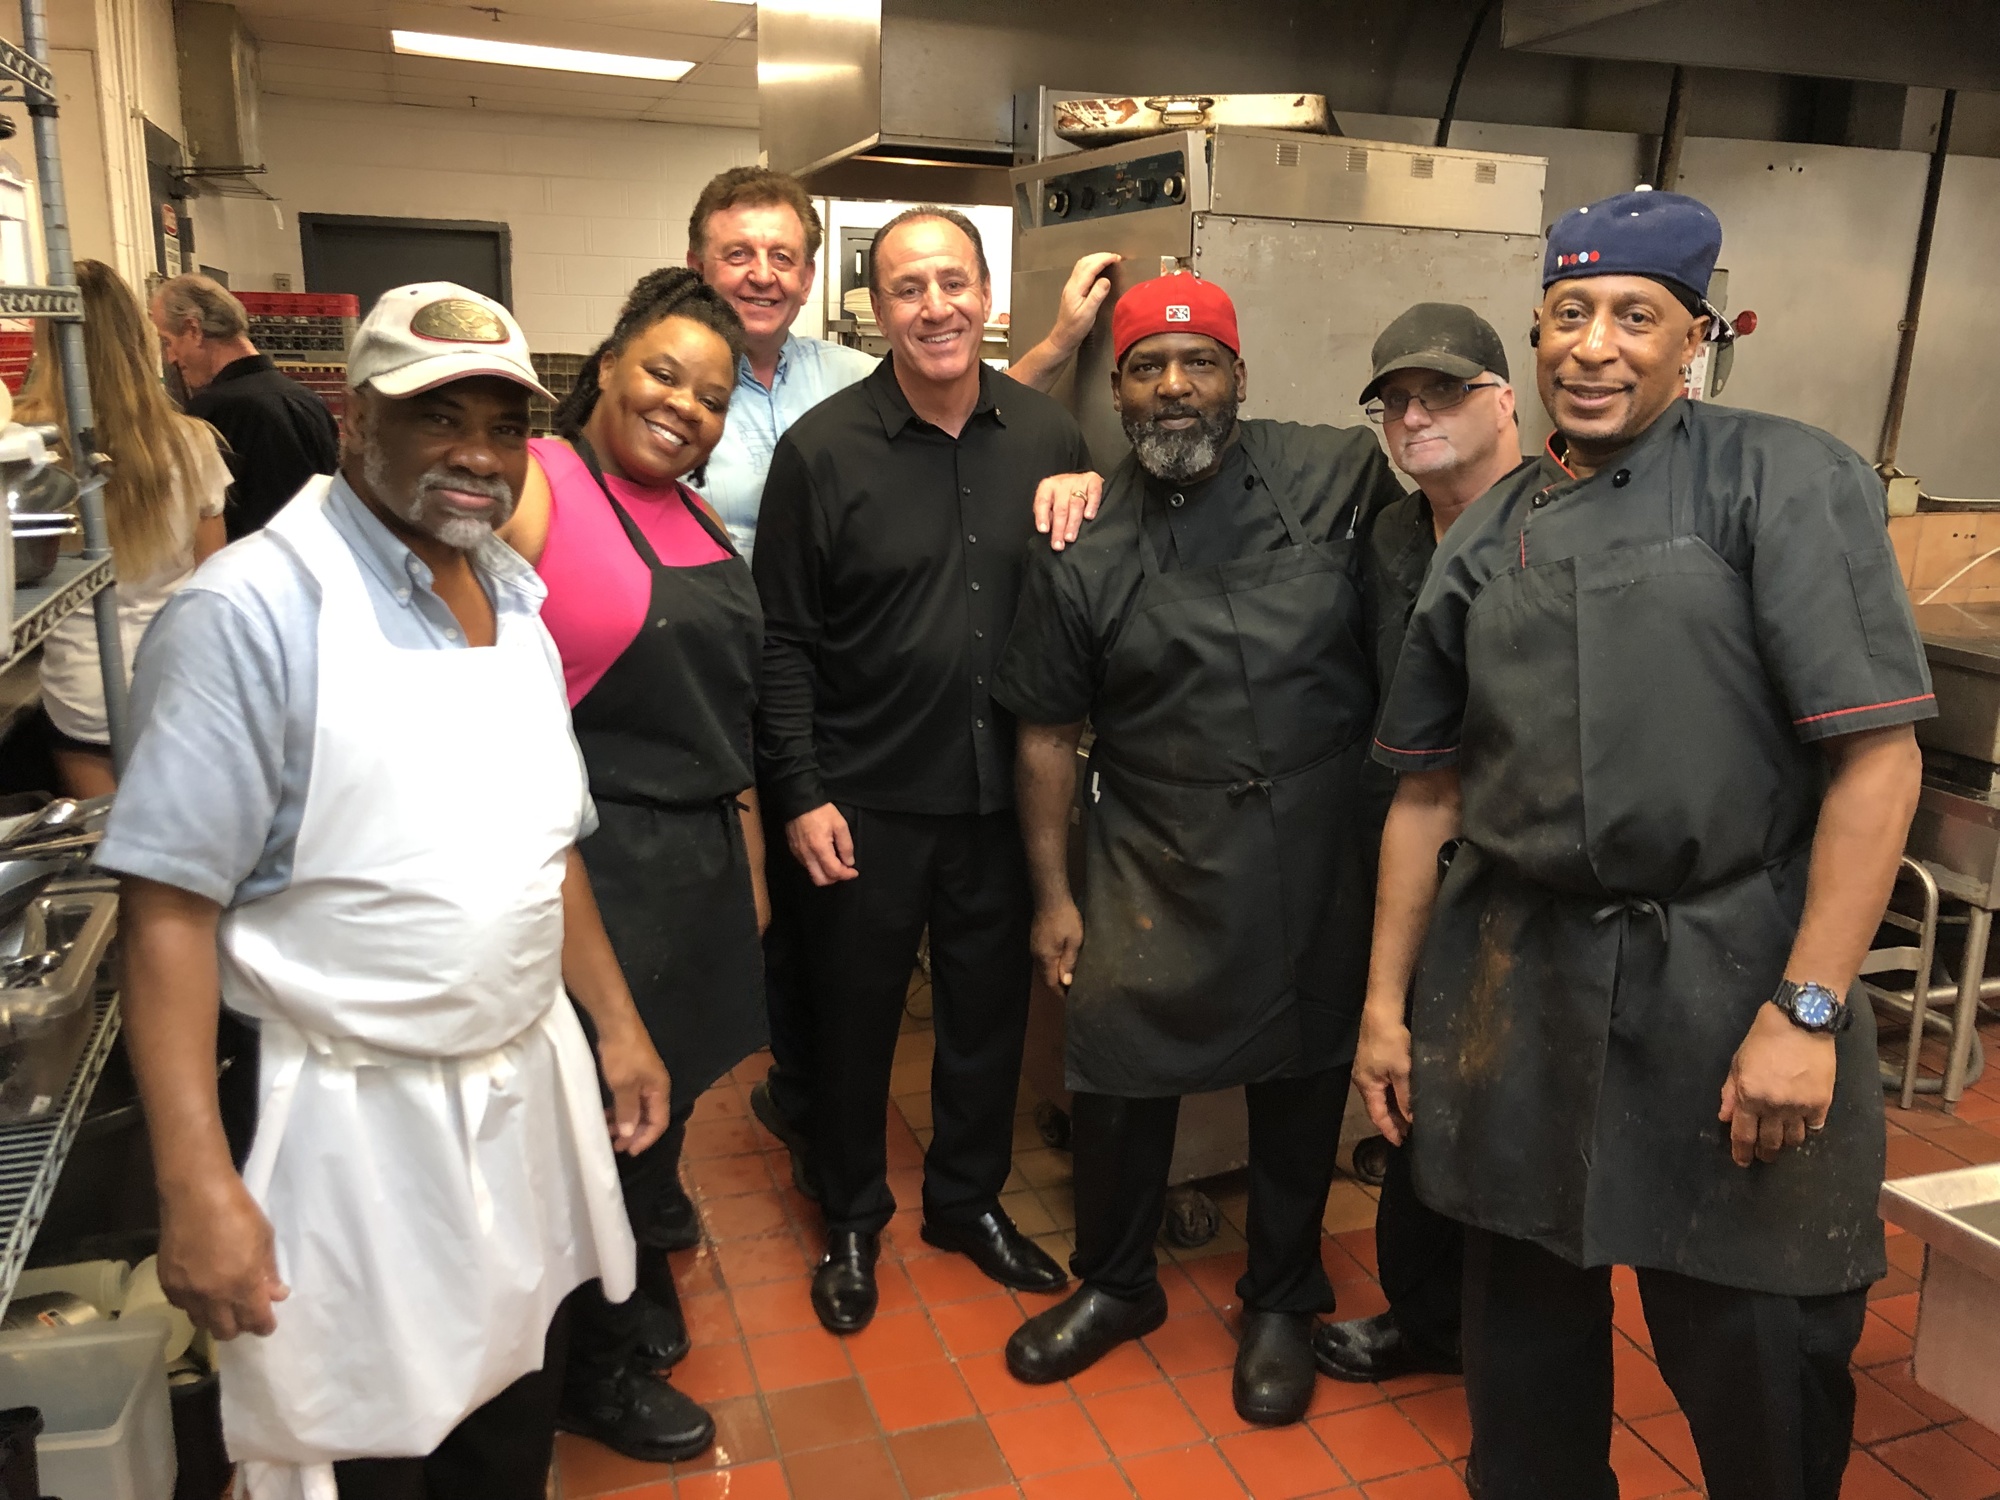 River City Brewing Co.’s final kitchen crew with co-owner Anthony Candelino, center, and head chef Marvin Barnes, center right.